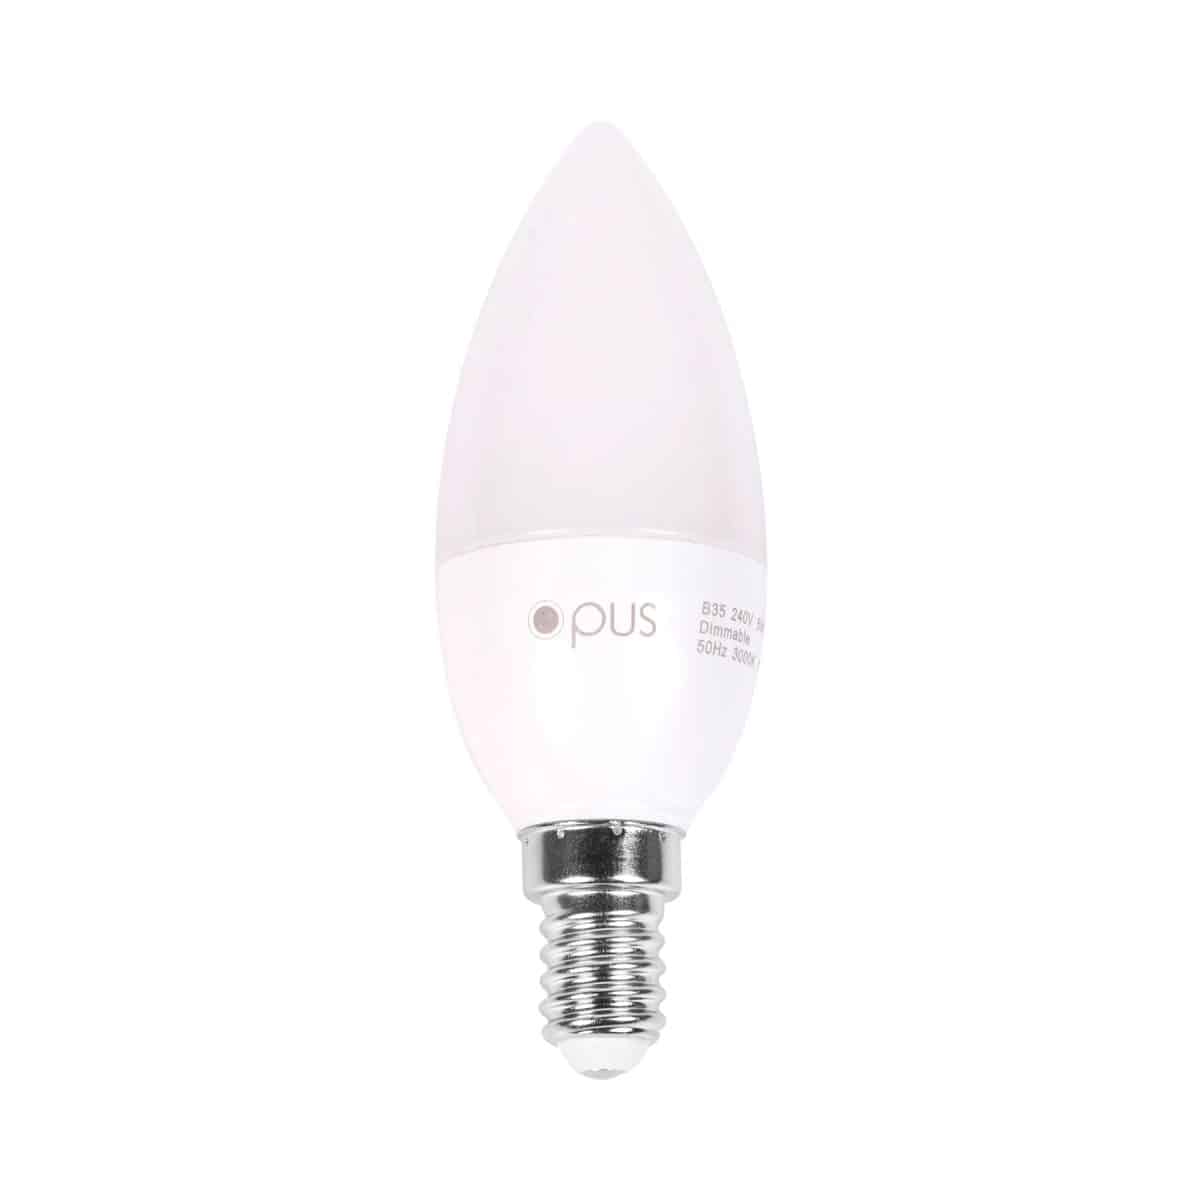 5watt Candle LED SES E14 Small Screw Cap Warm White Equivalent To 40watt Dimmable